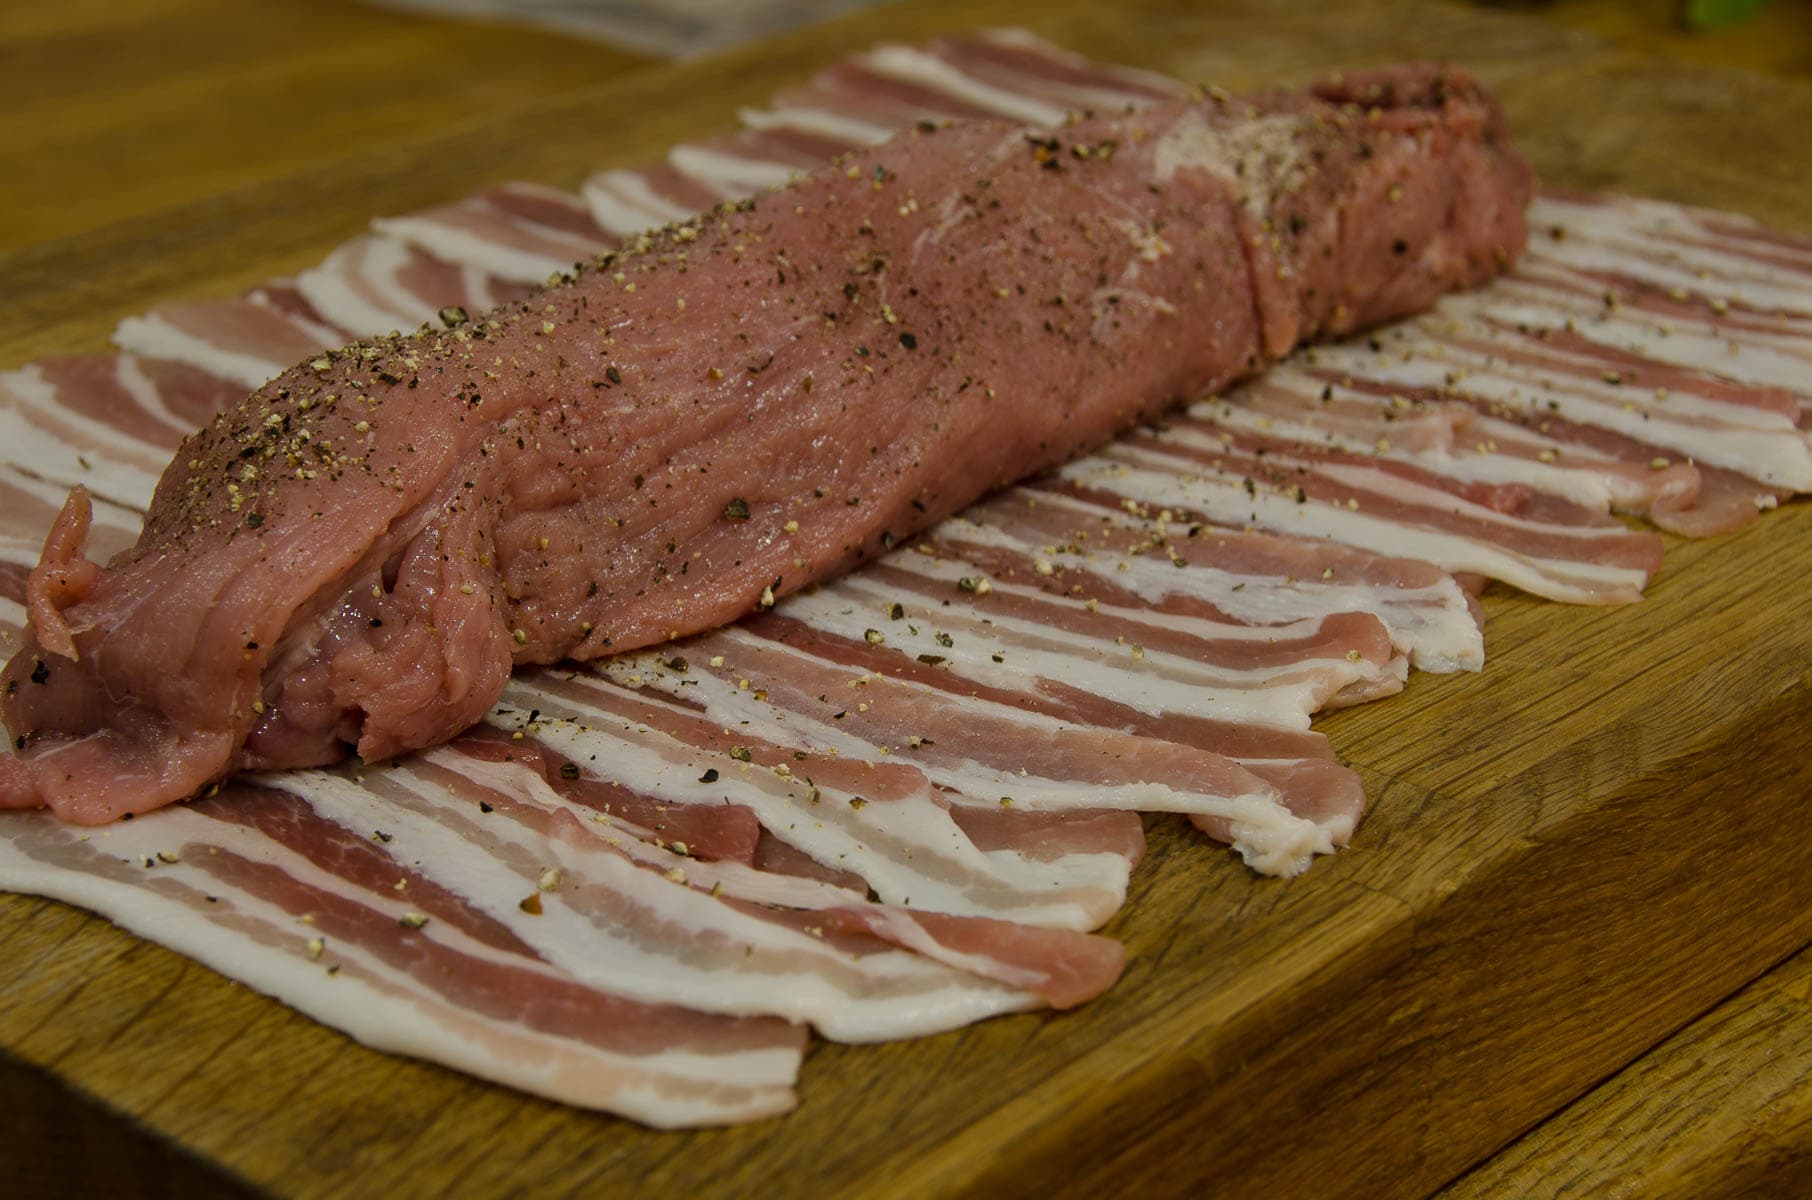 A layer of streaky bacon strips with a piece of seasoned pork fillet on top .